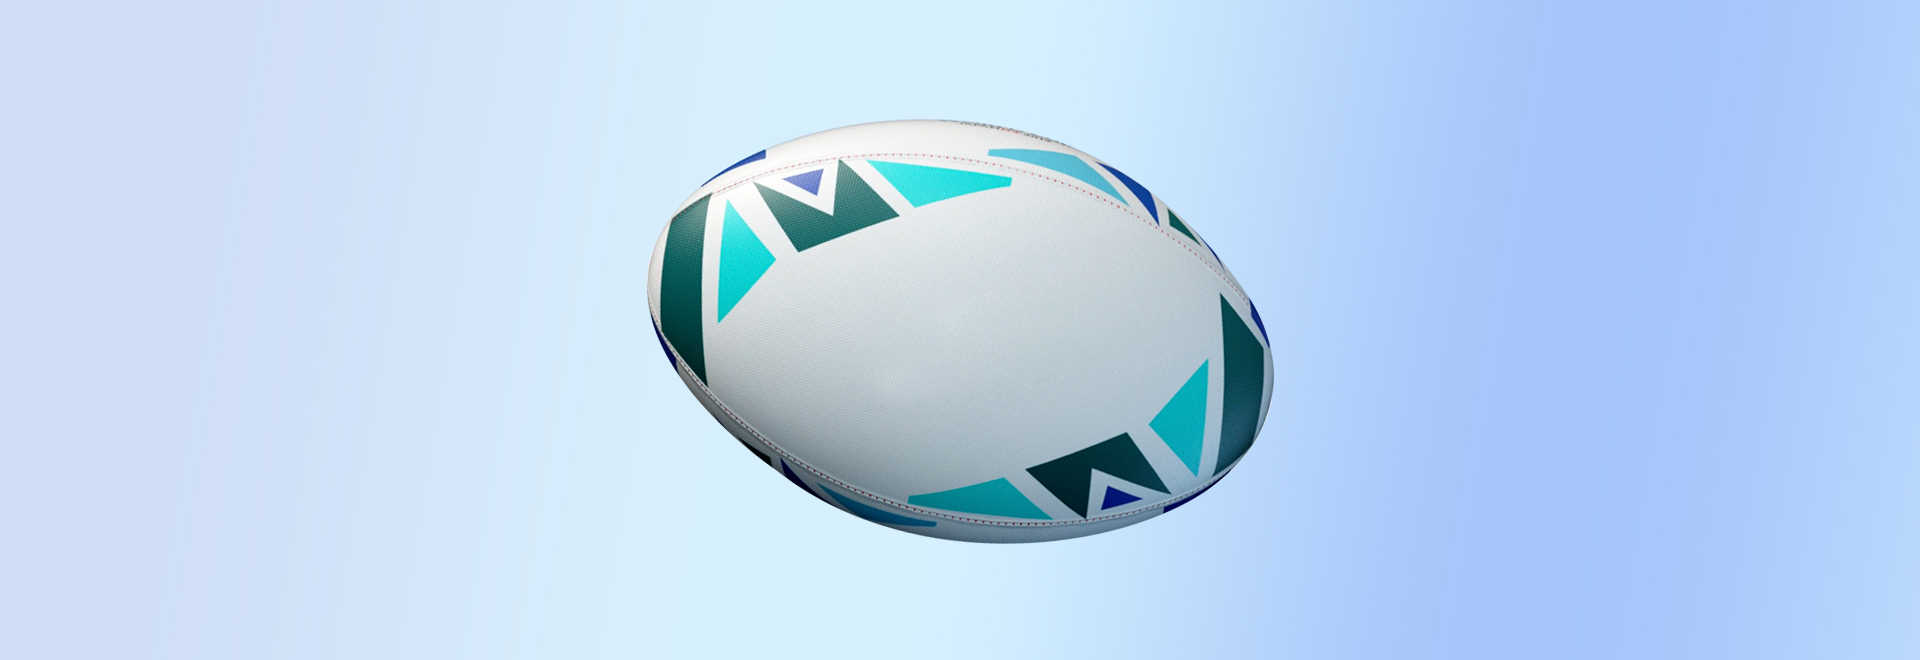 RUGBY-POSTER-FRAME-VIMEO-1920X660PX-2